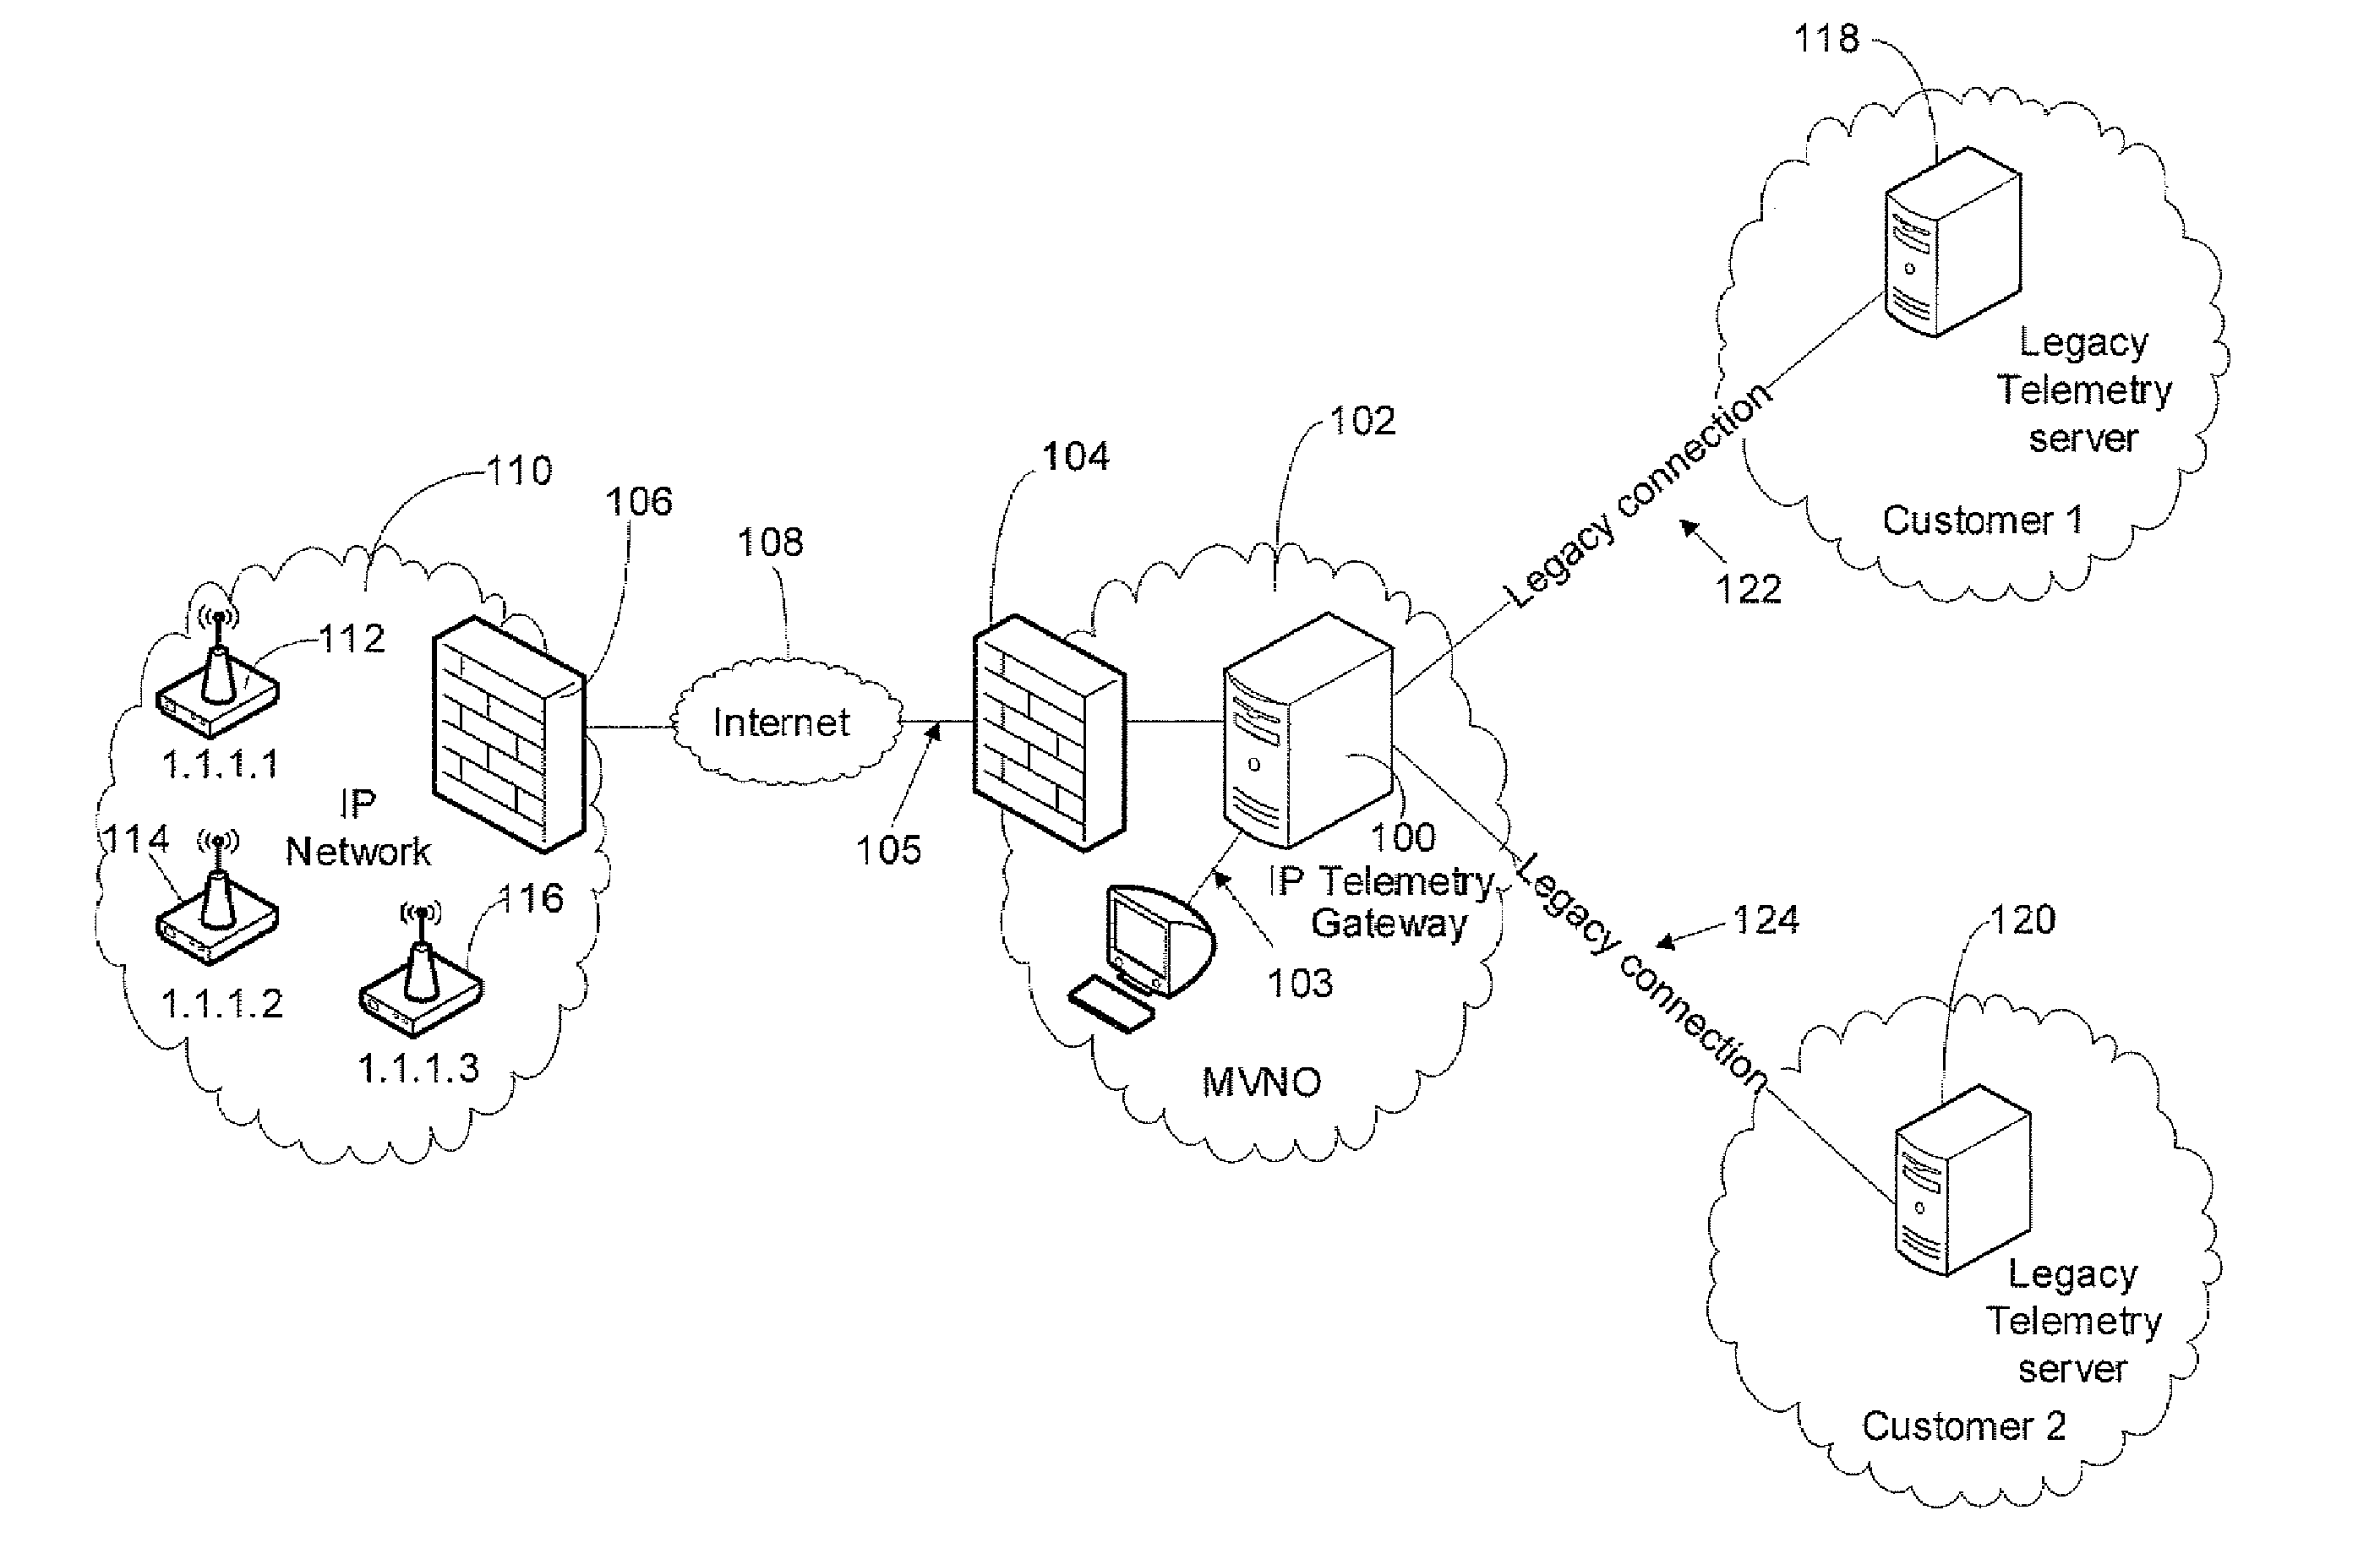 Distributed Architecture for IP-Based Telemetry Services